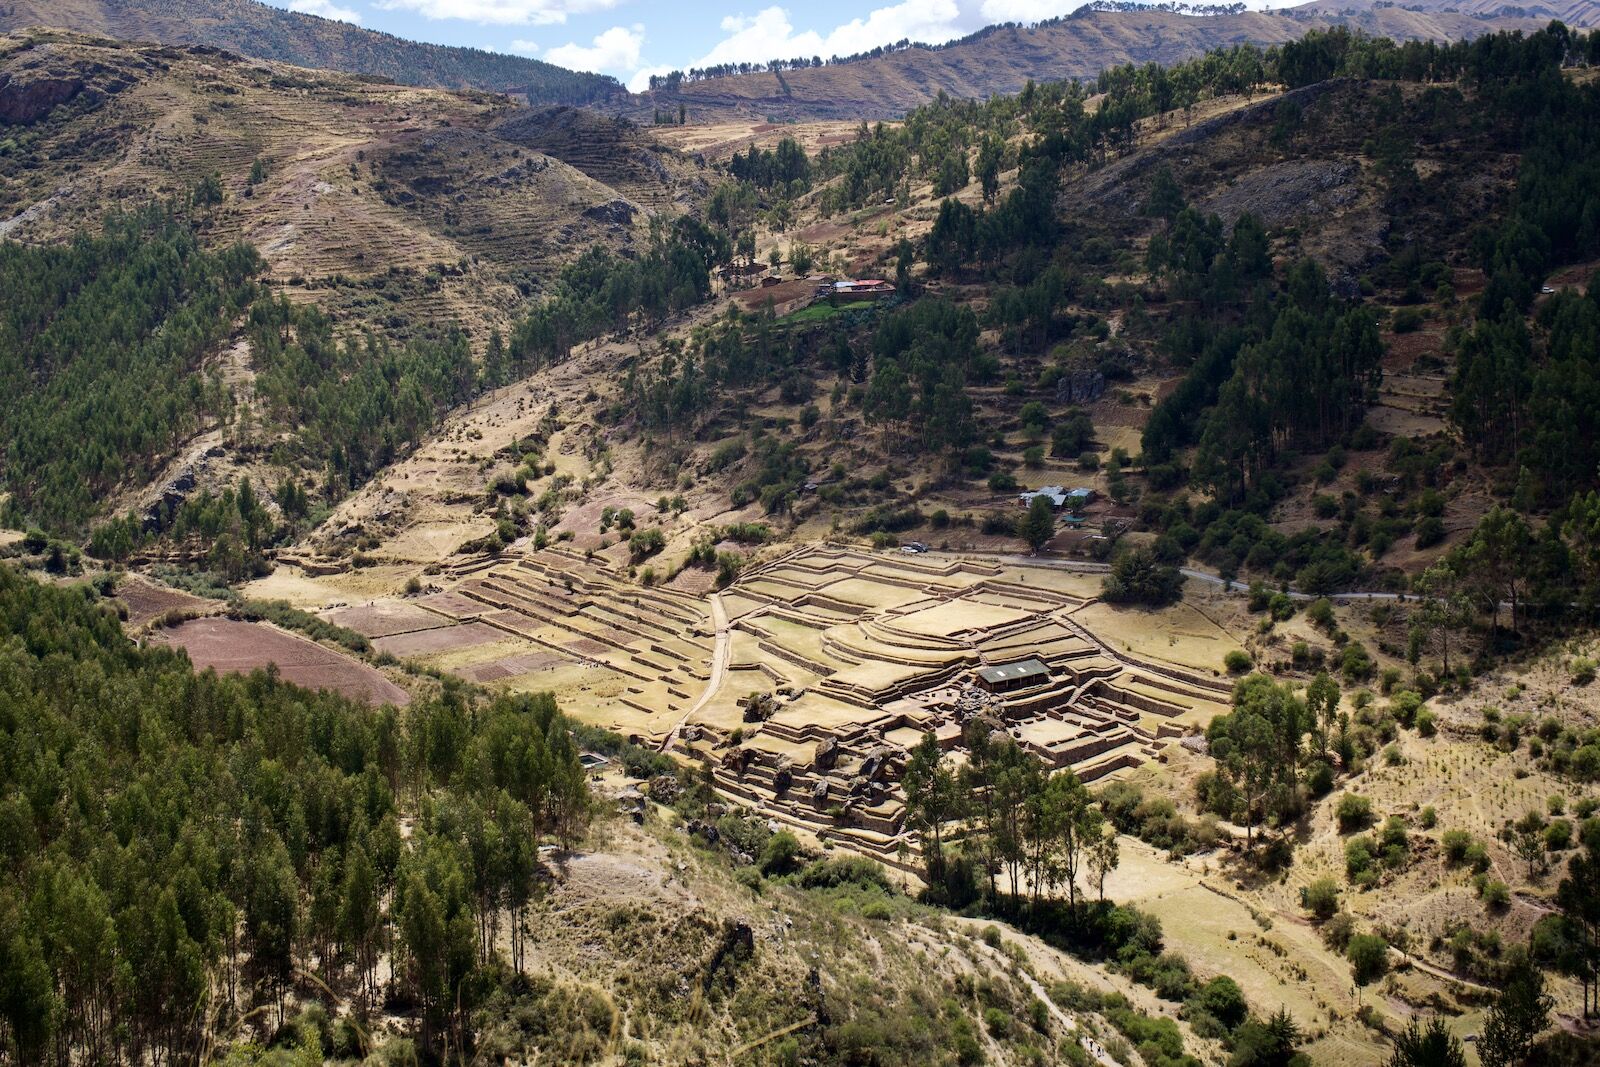 Cusco archeological site of Inkilltambo from above